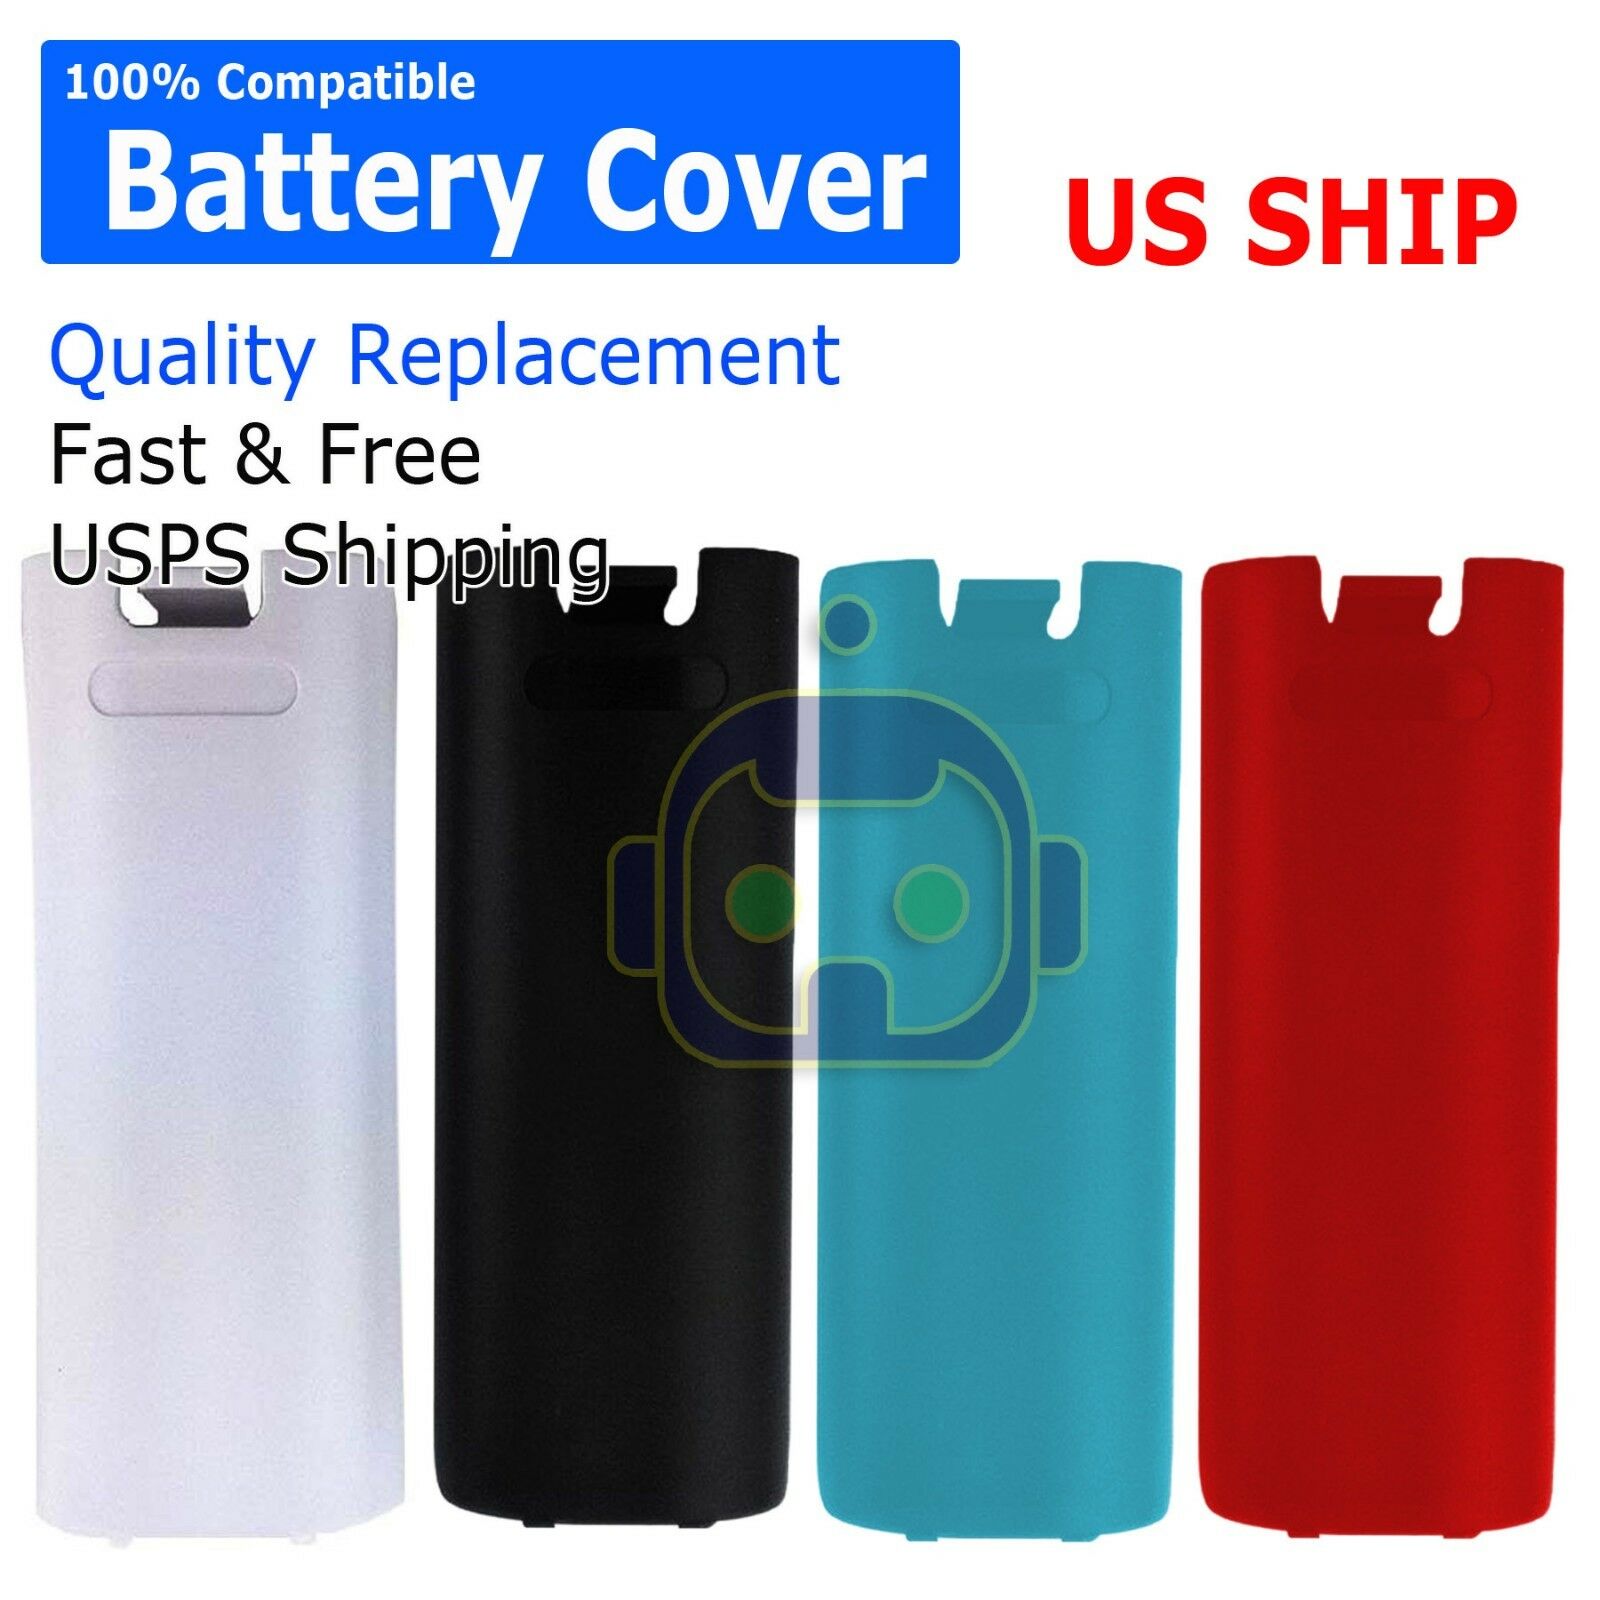 Battery Cover Back Door Cover Lip For Controller Wii U Remote Nintendo Wii